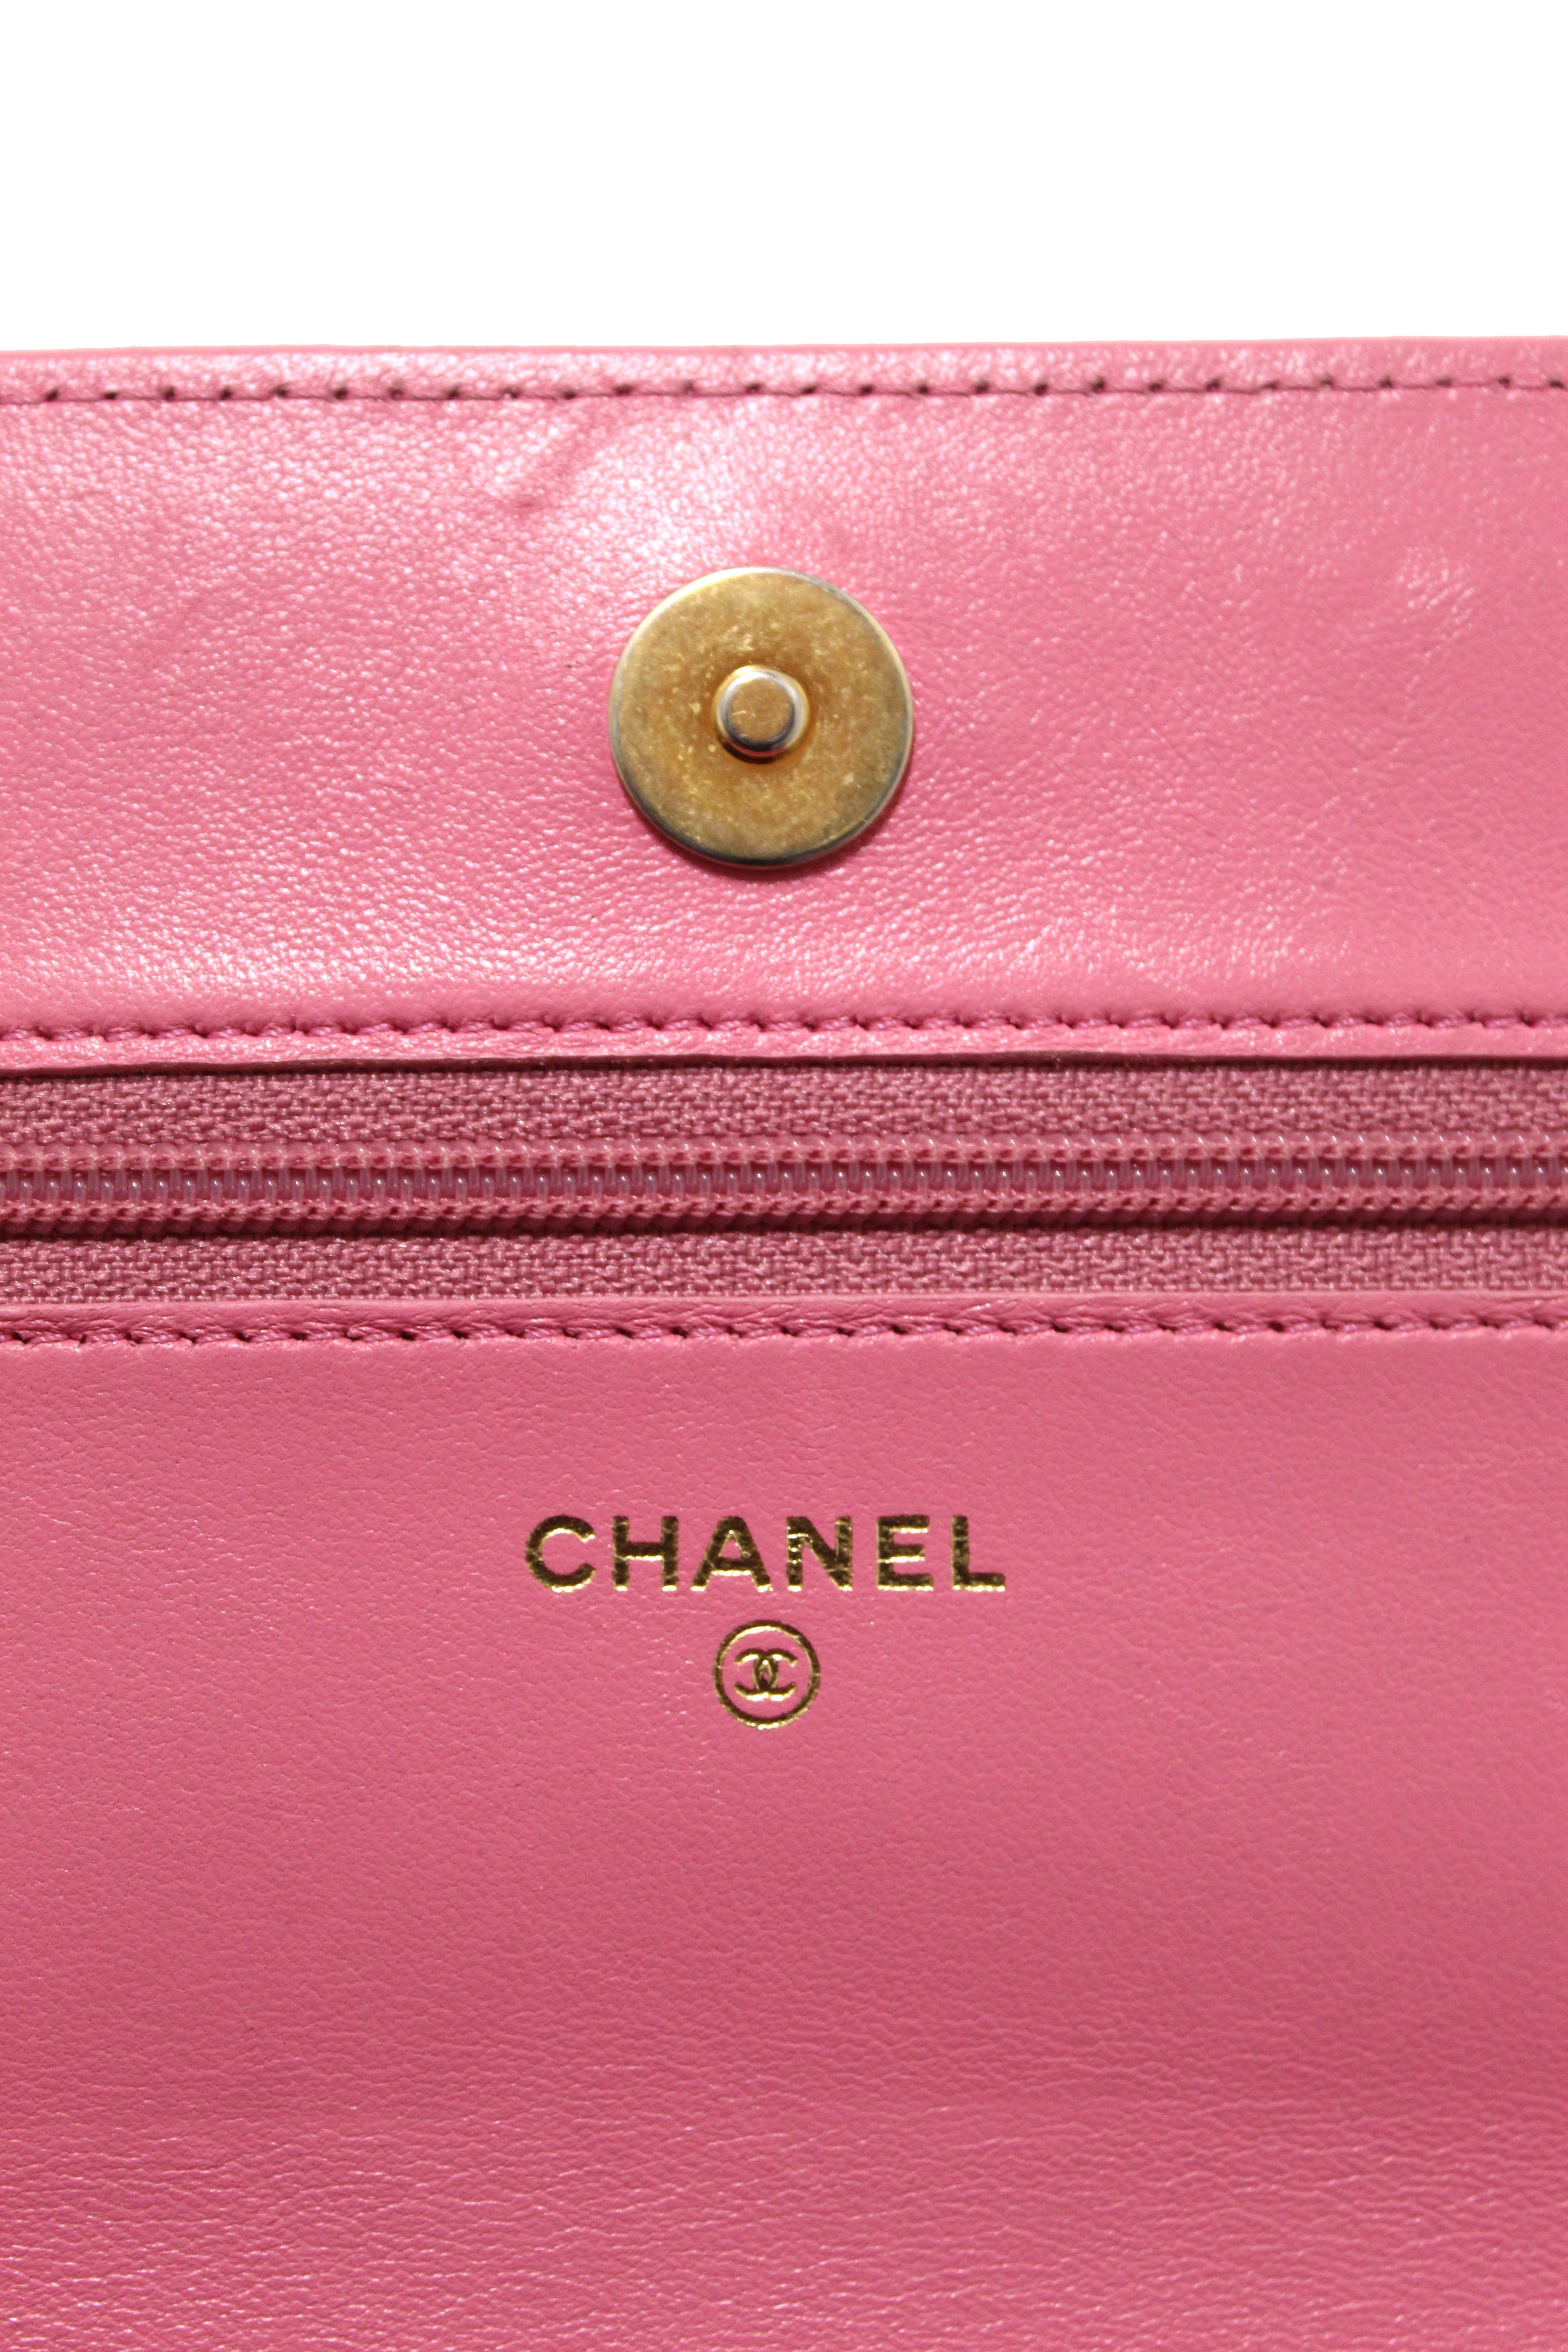 Authentic Chanel 19 Wallet On Chain WOC Pink Lambskin Leather – Paris  Station Shop